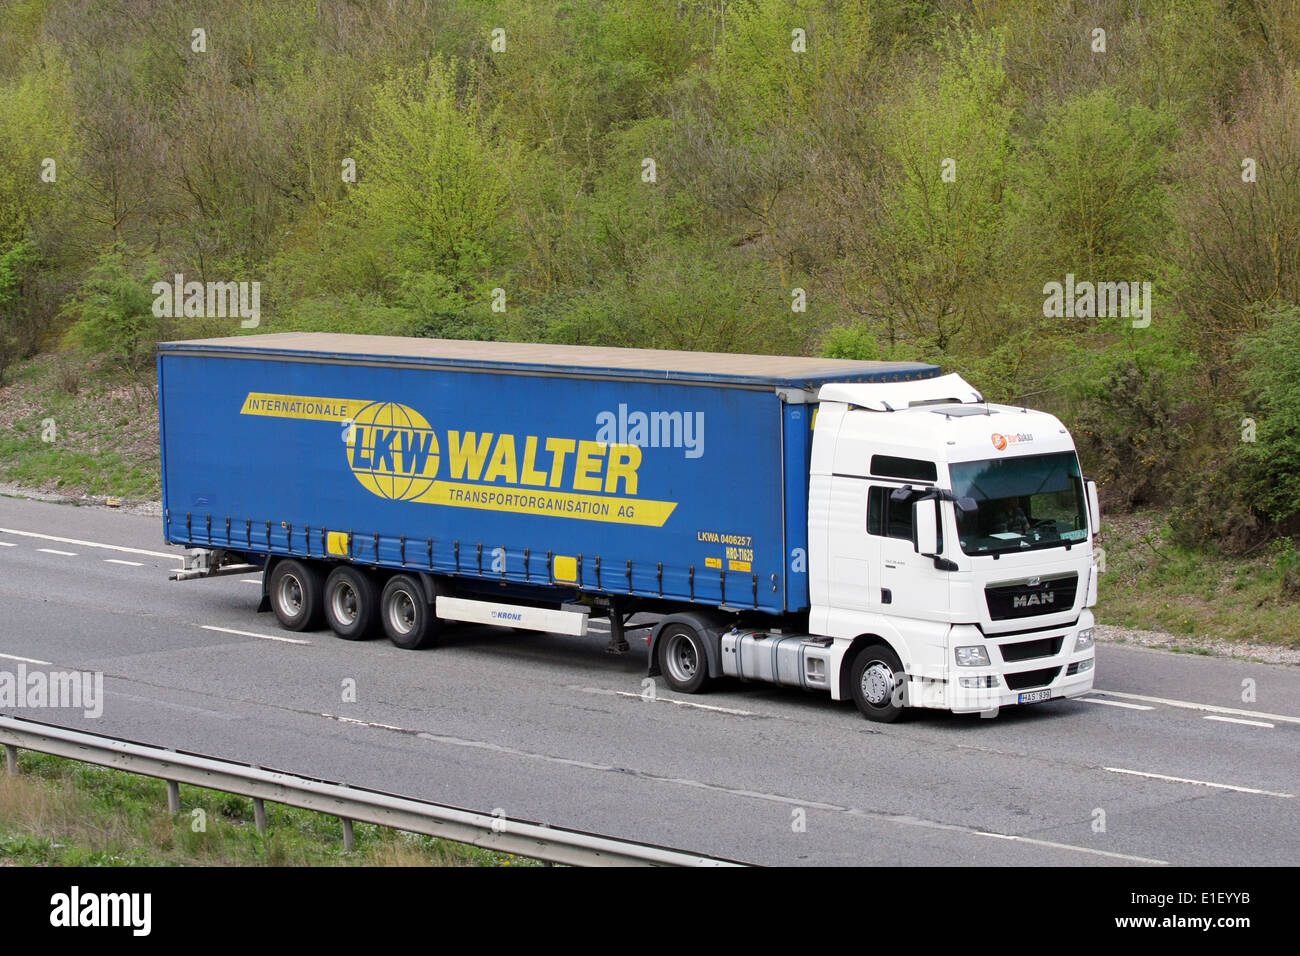 An LKW Walter truck traveling along the M20 motorway in Kent, England Stock Photo